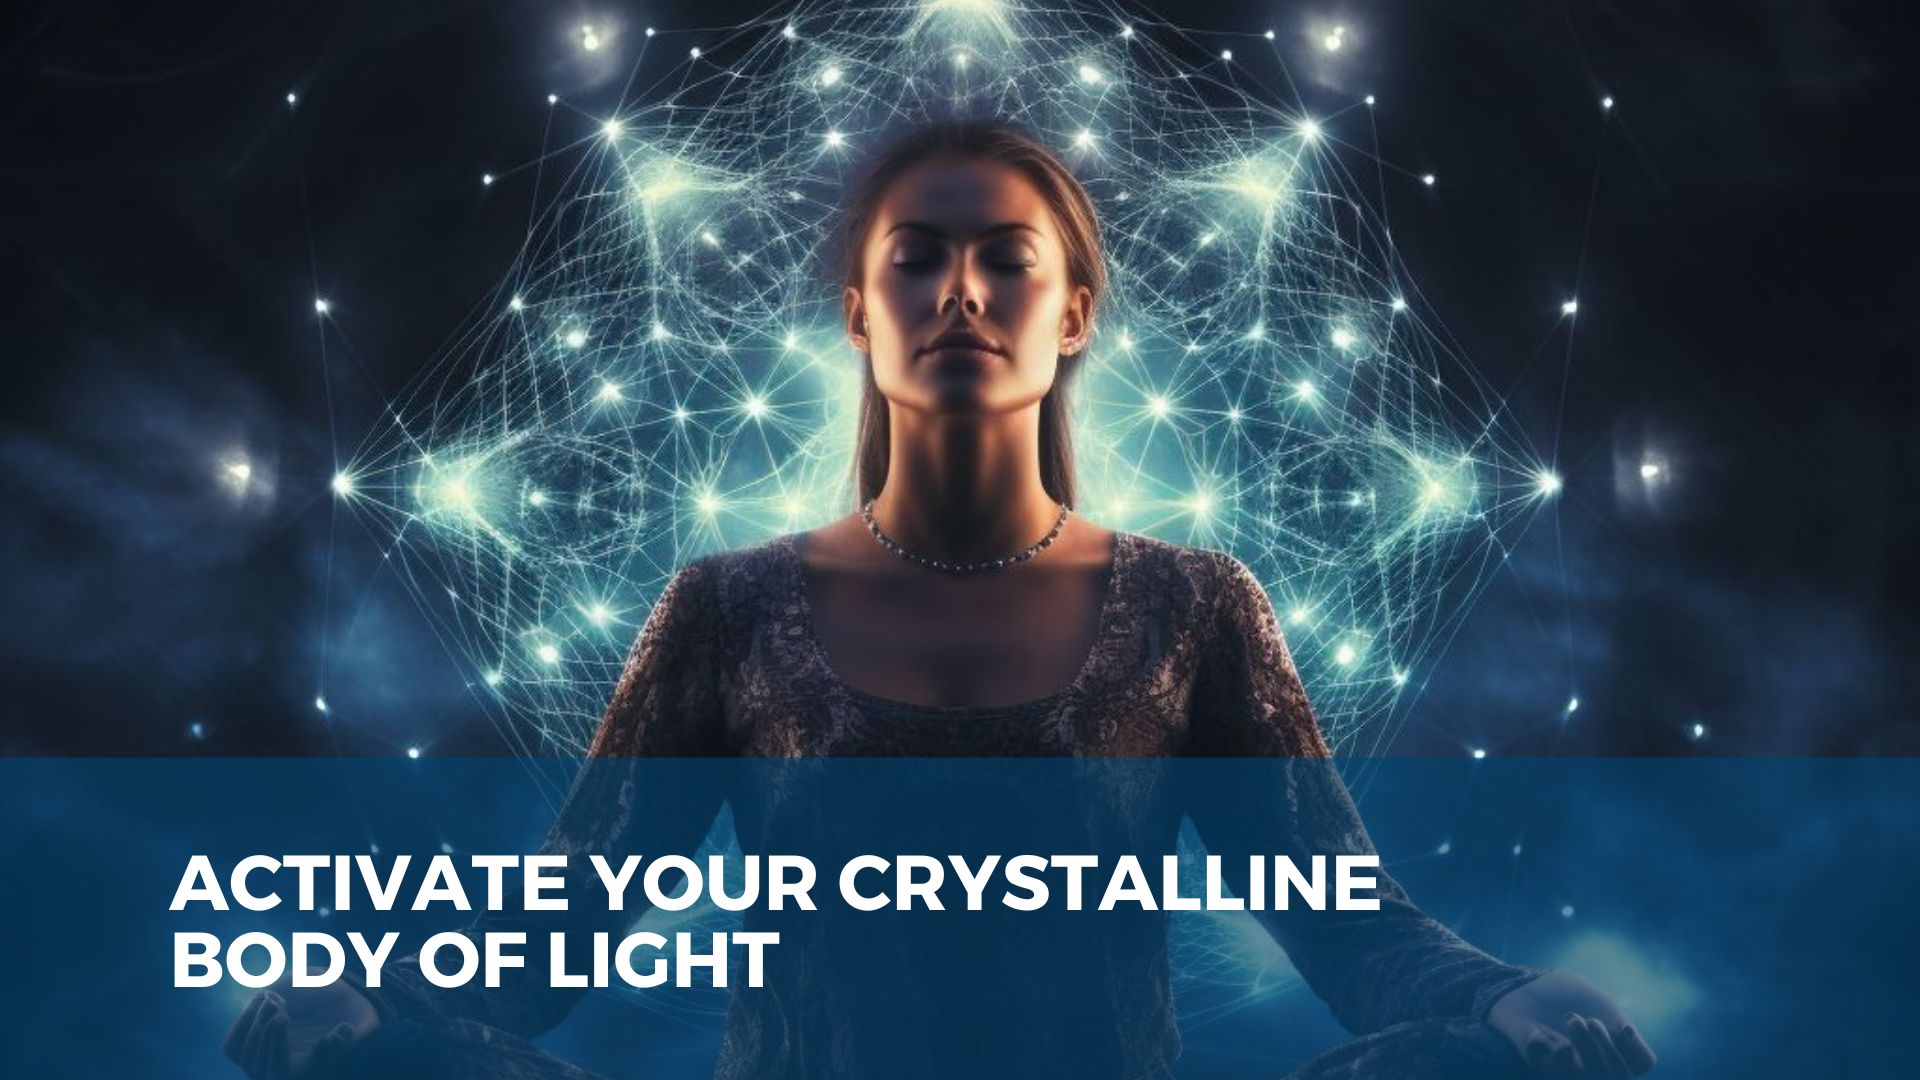 Activate your Crystalline Body of Light